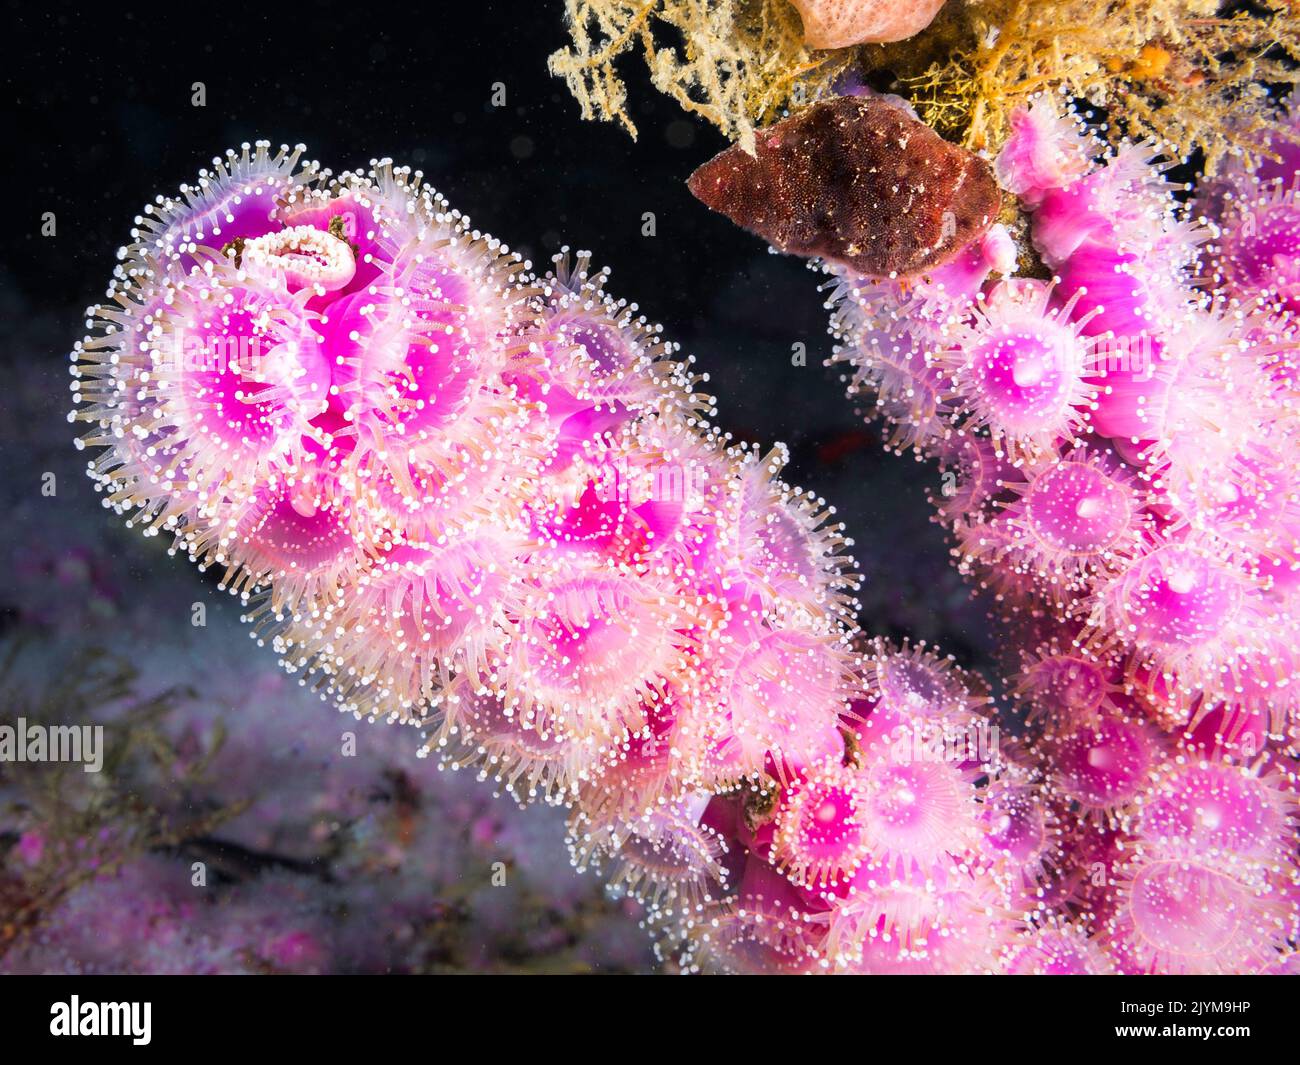 Strawberry Anemones (Actinia fragacea) covering a protrusion on the reef underwater Stock Photo